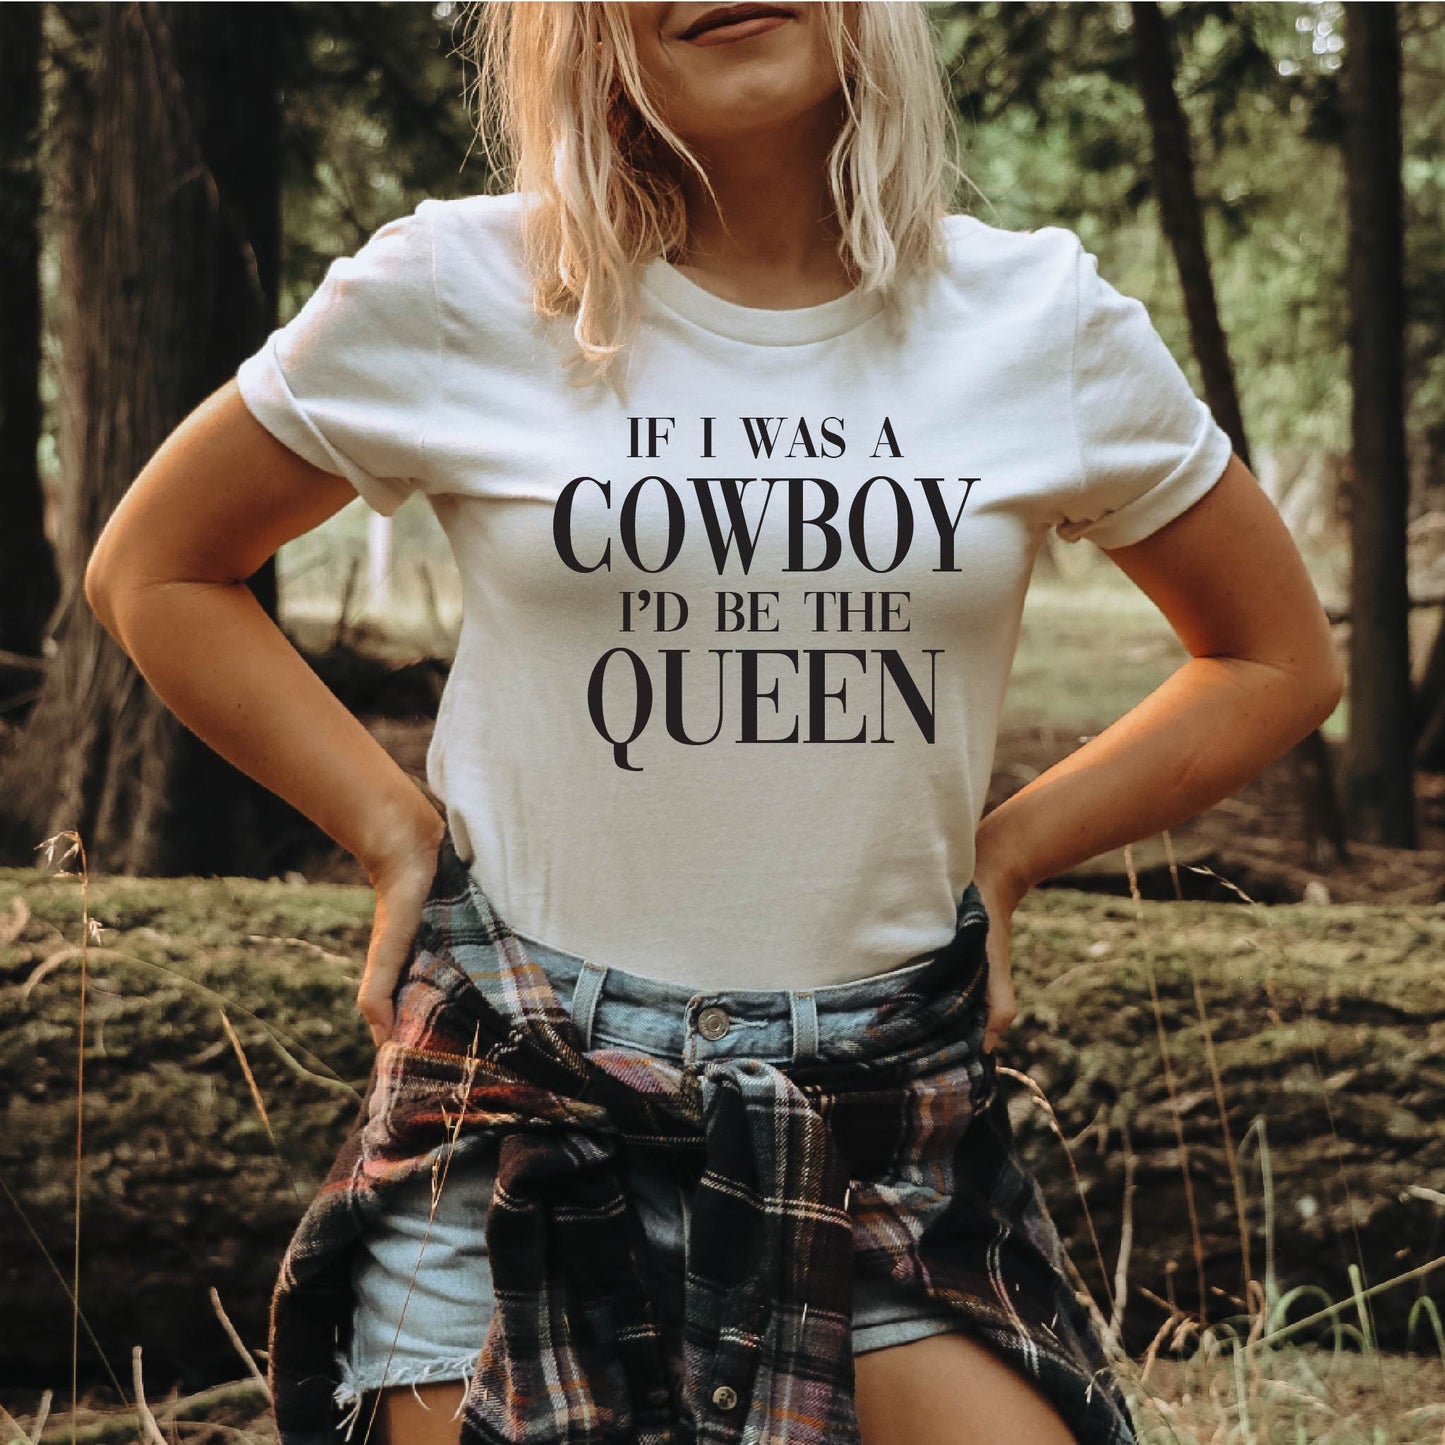 If I was a Cowboy I'd be the Queen